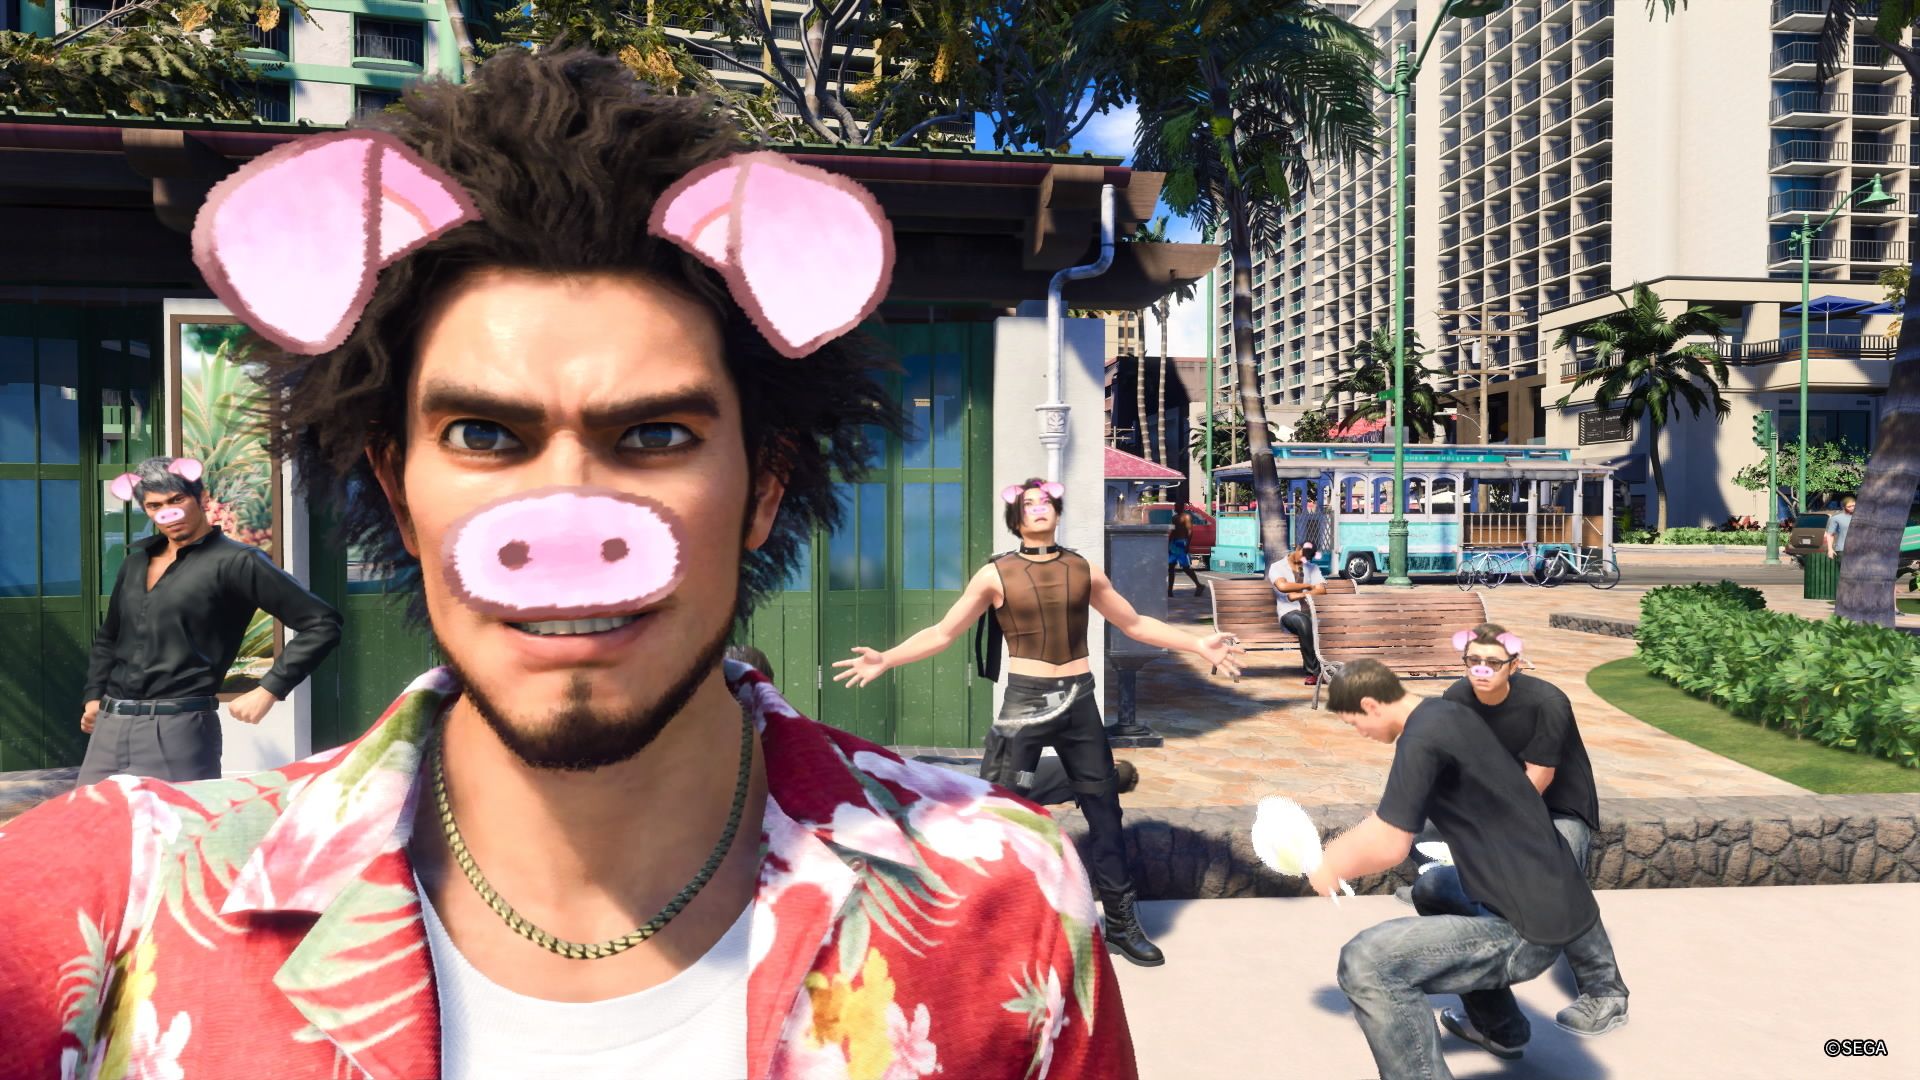 A man taking a selfie with a cartoon pig filter, in the background, more men with pig filters are posing